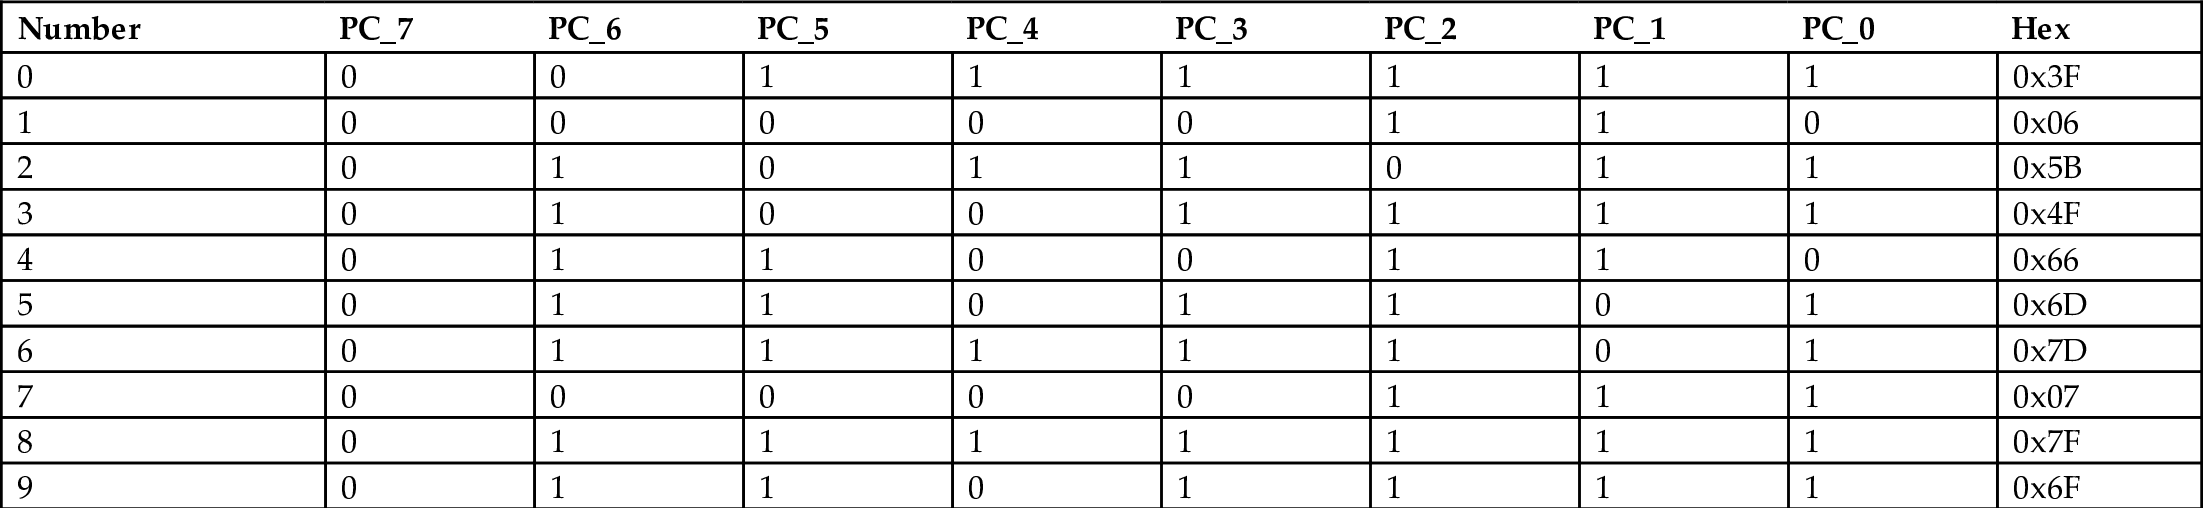 Table 7.1